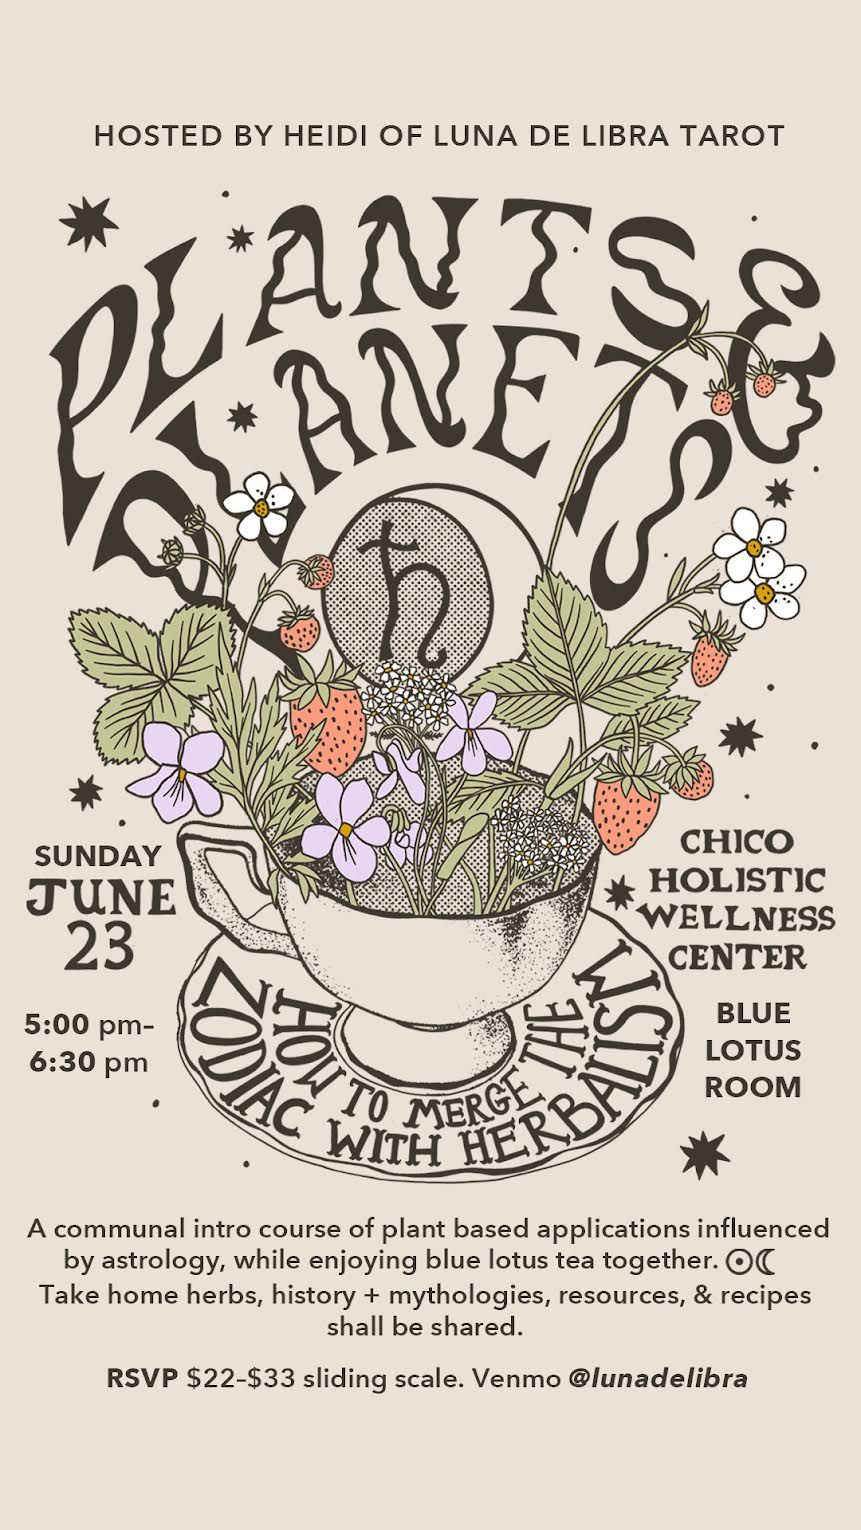 Plants & Planets: How to Merge the Zodiac With Herbalism